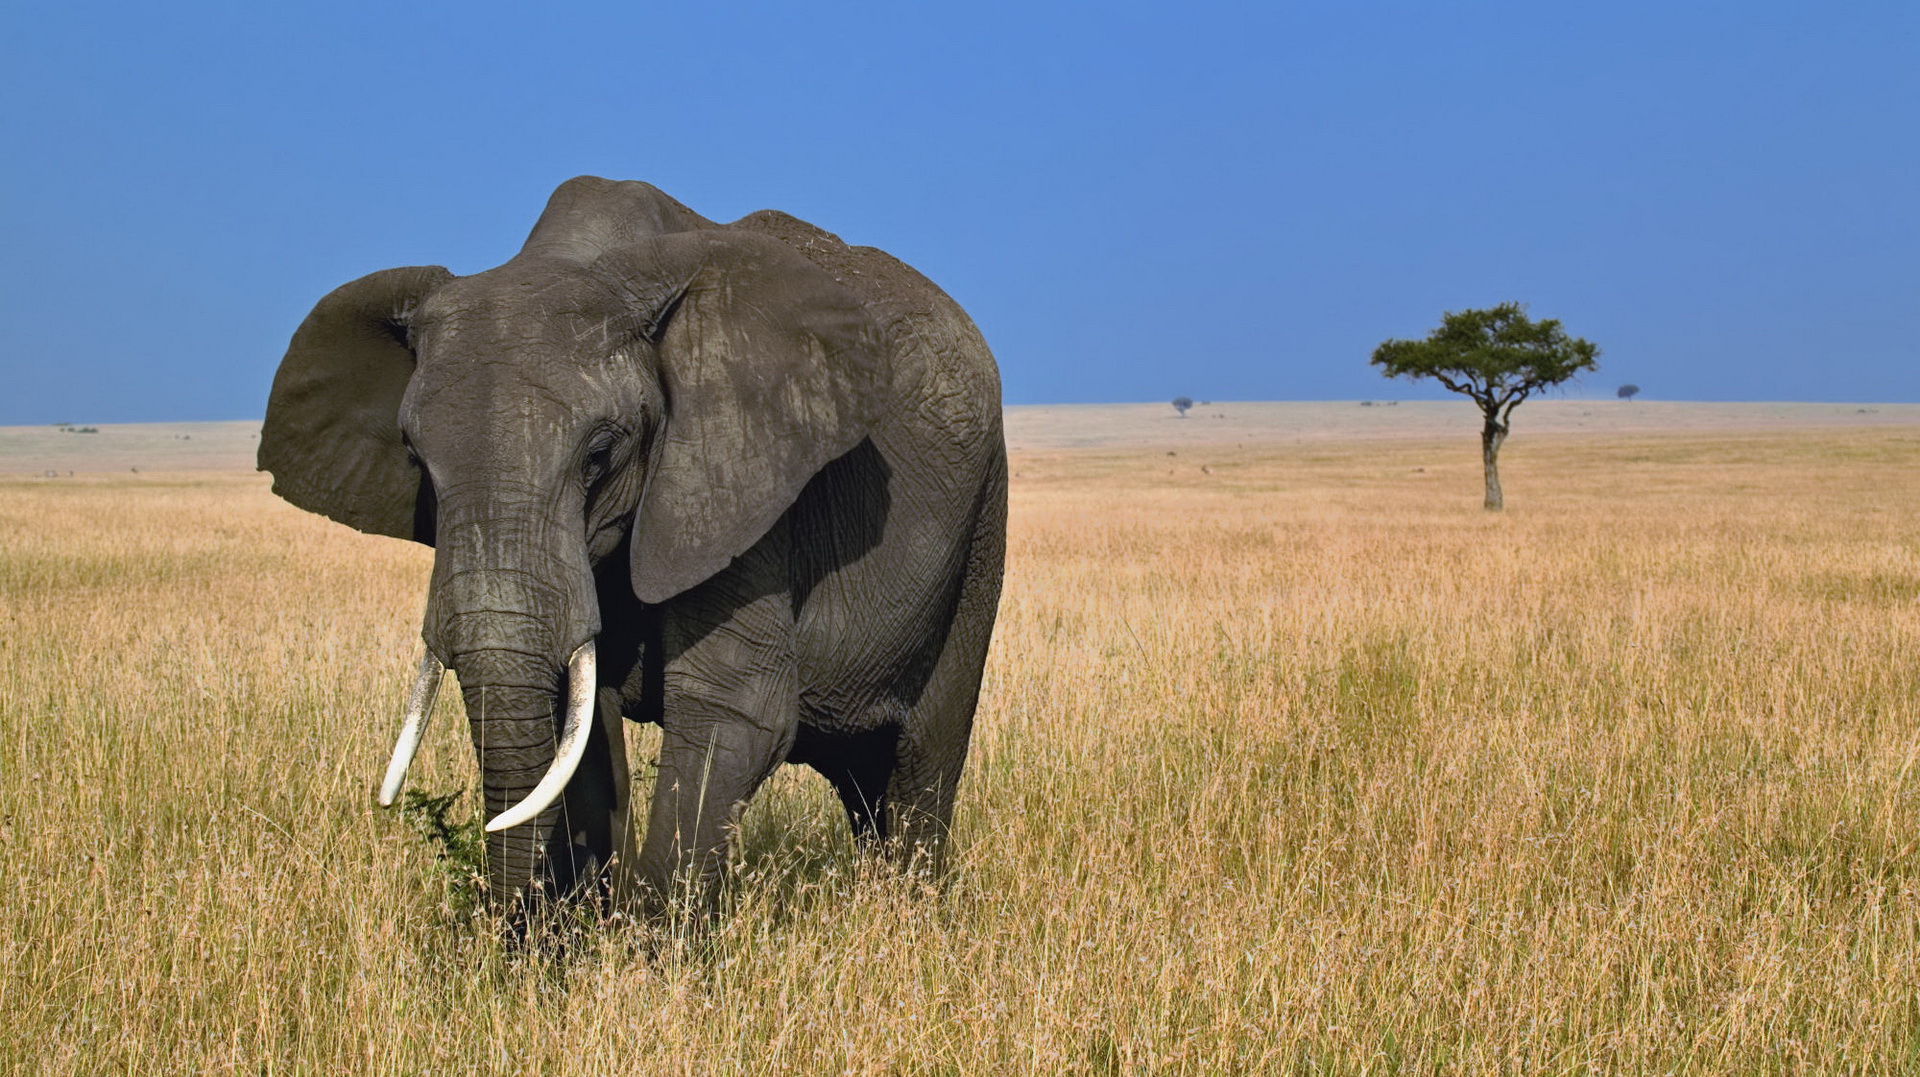 Free Download Cute Animals Picture - The Elephant Walking Alone, Hope It is Not Losing Its Way 1920X1080 free wallpaper download